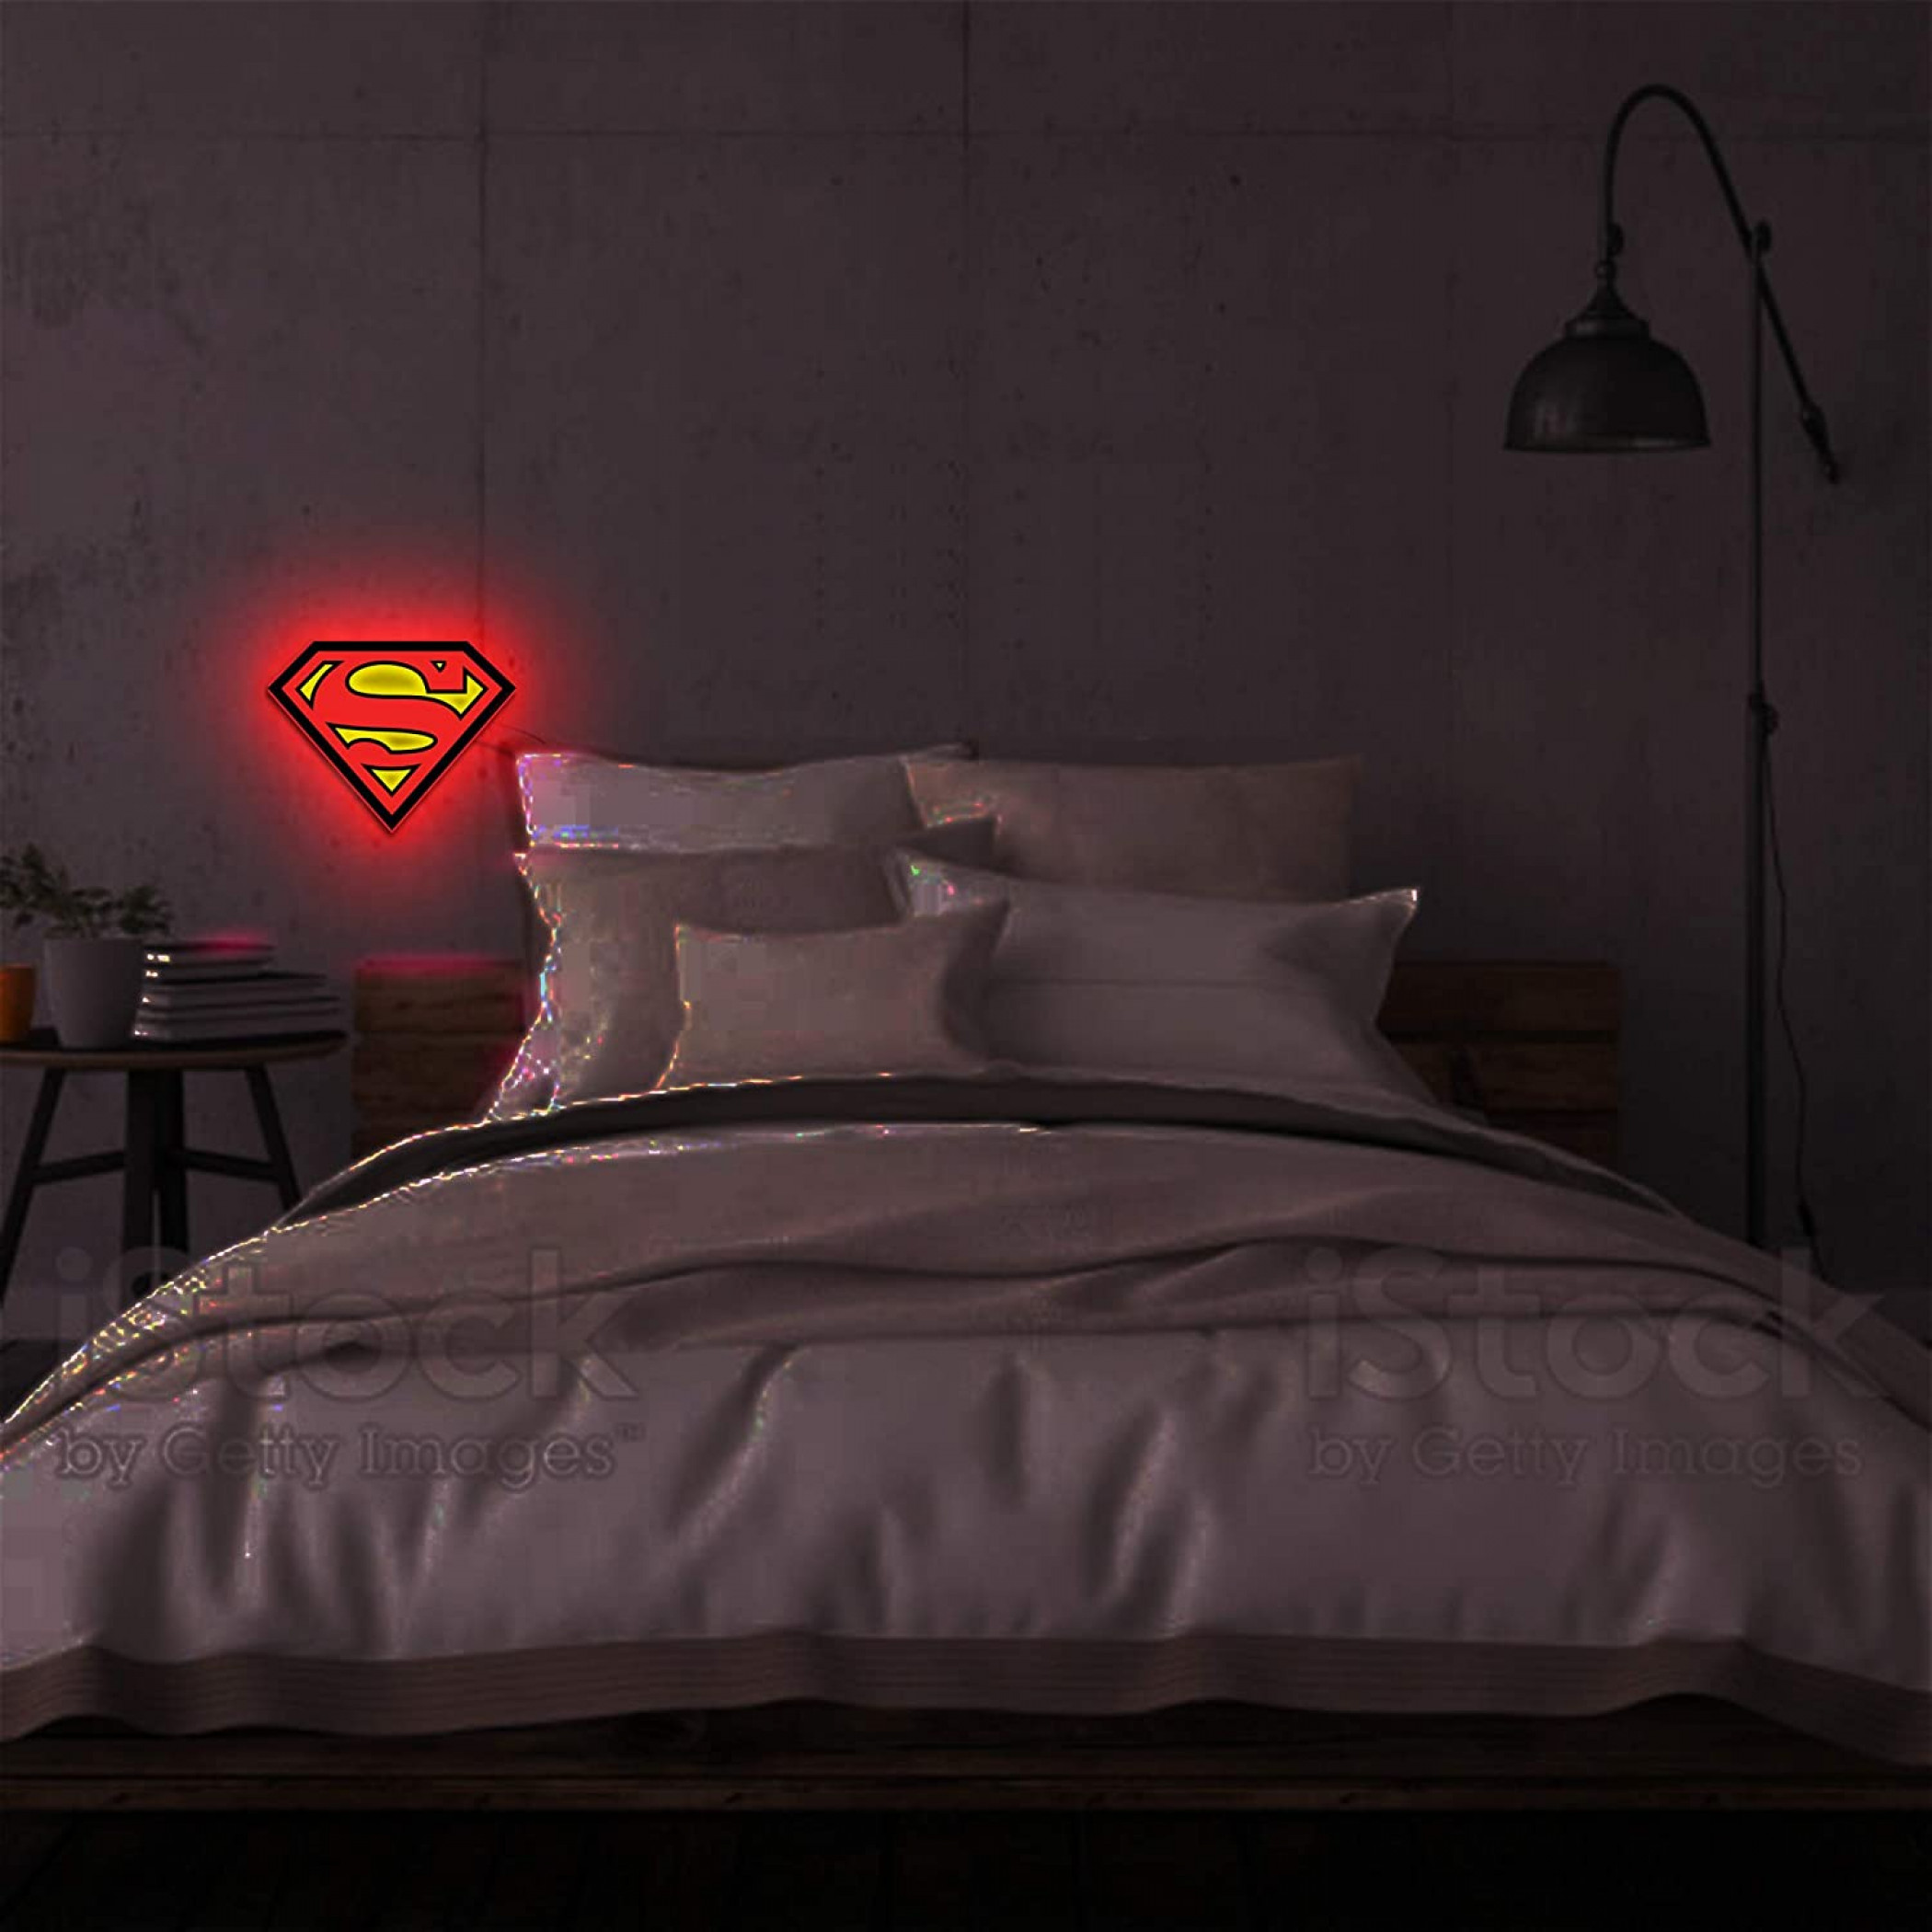 Superman Symbol Illuminated Table Lamp Or Mountable Wall Art With Dimmer